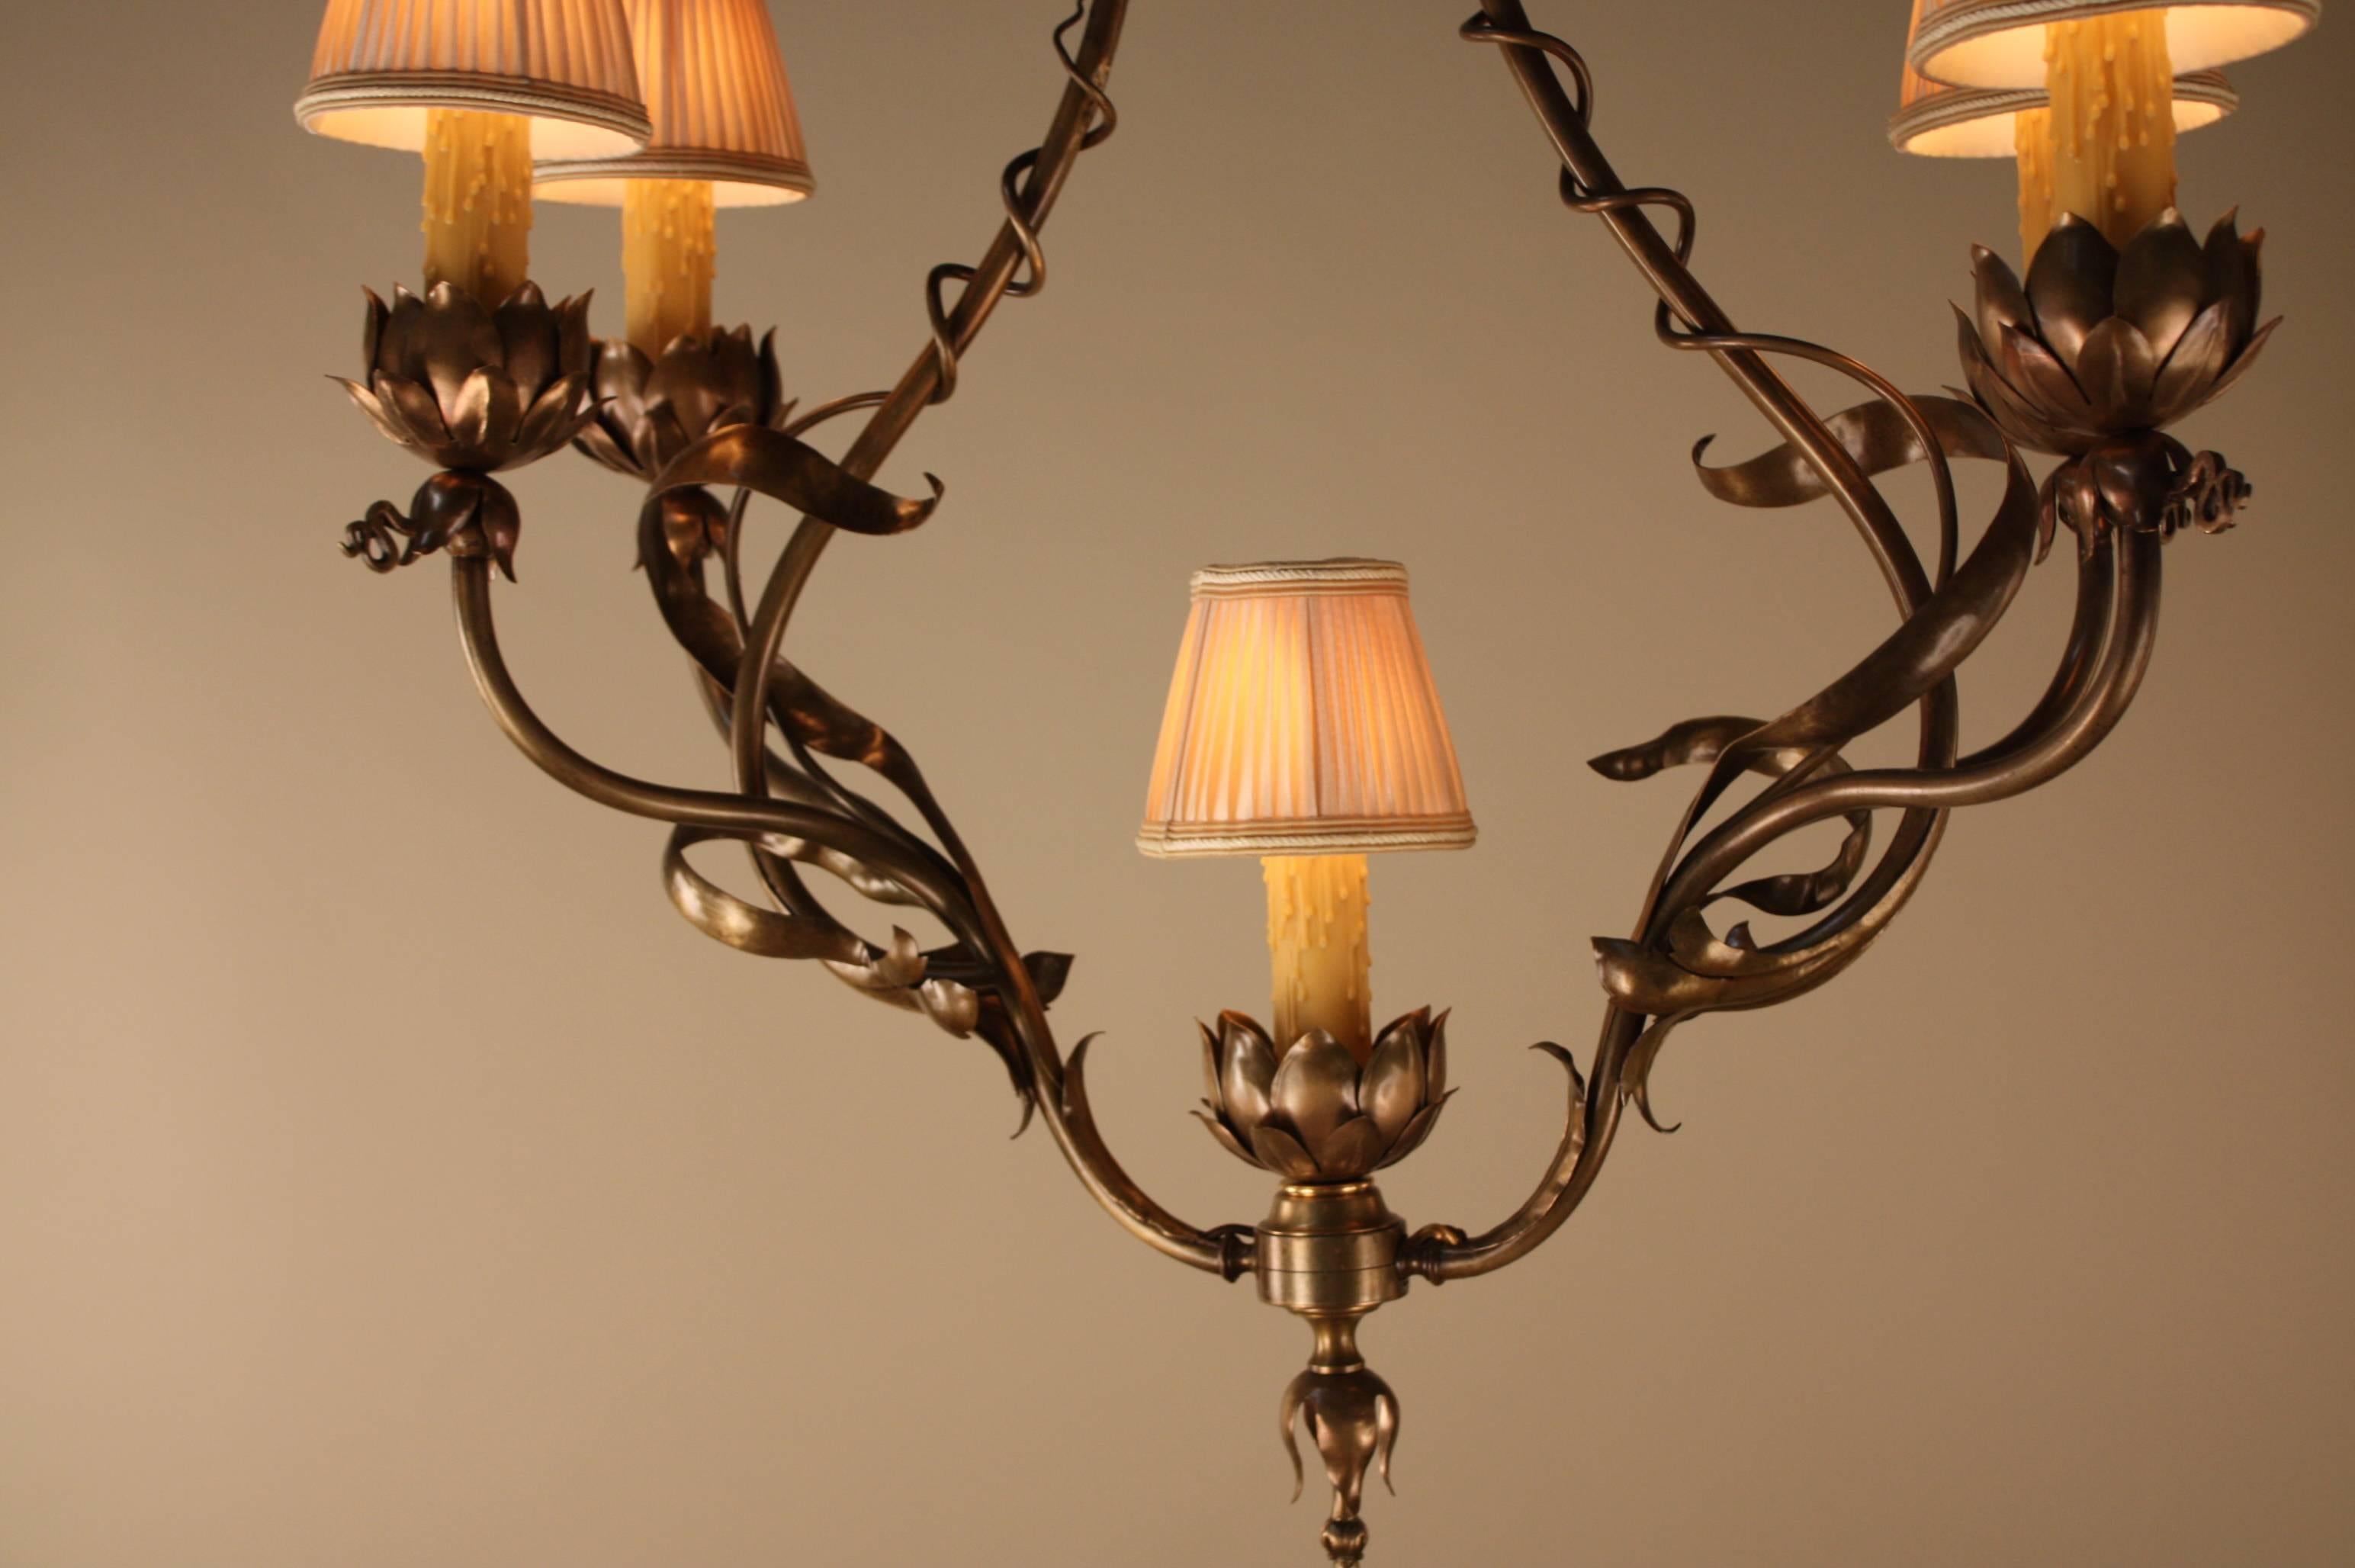 Fantastic electrified gas five-light French19th century bronze Art Nouveau chandelier and fitted with pleated silk lampshades.
The measurement below is without lampshade.